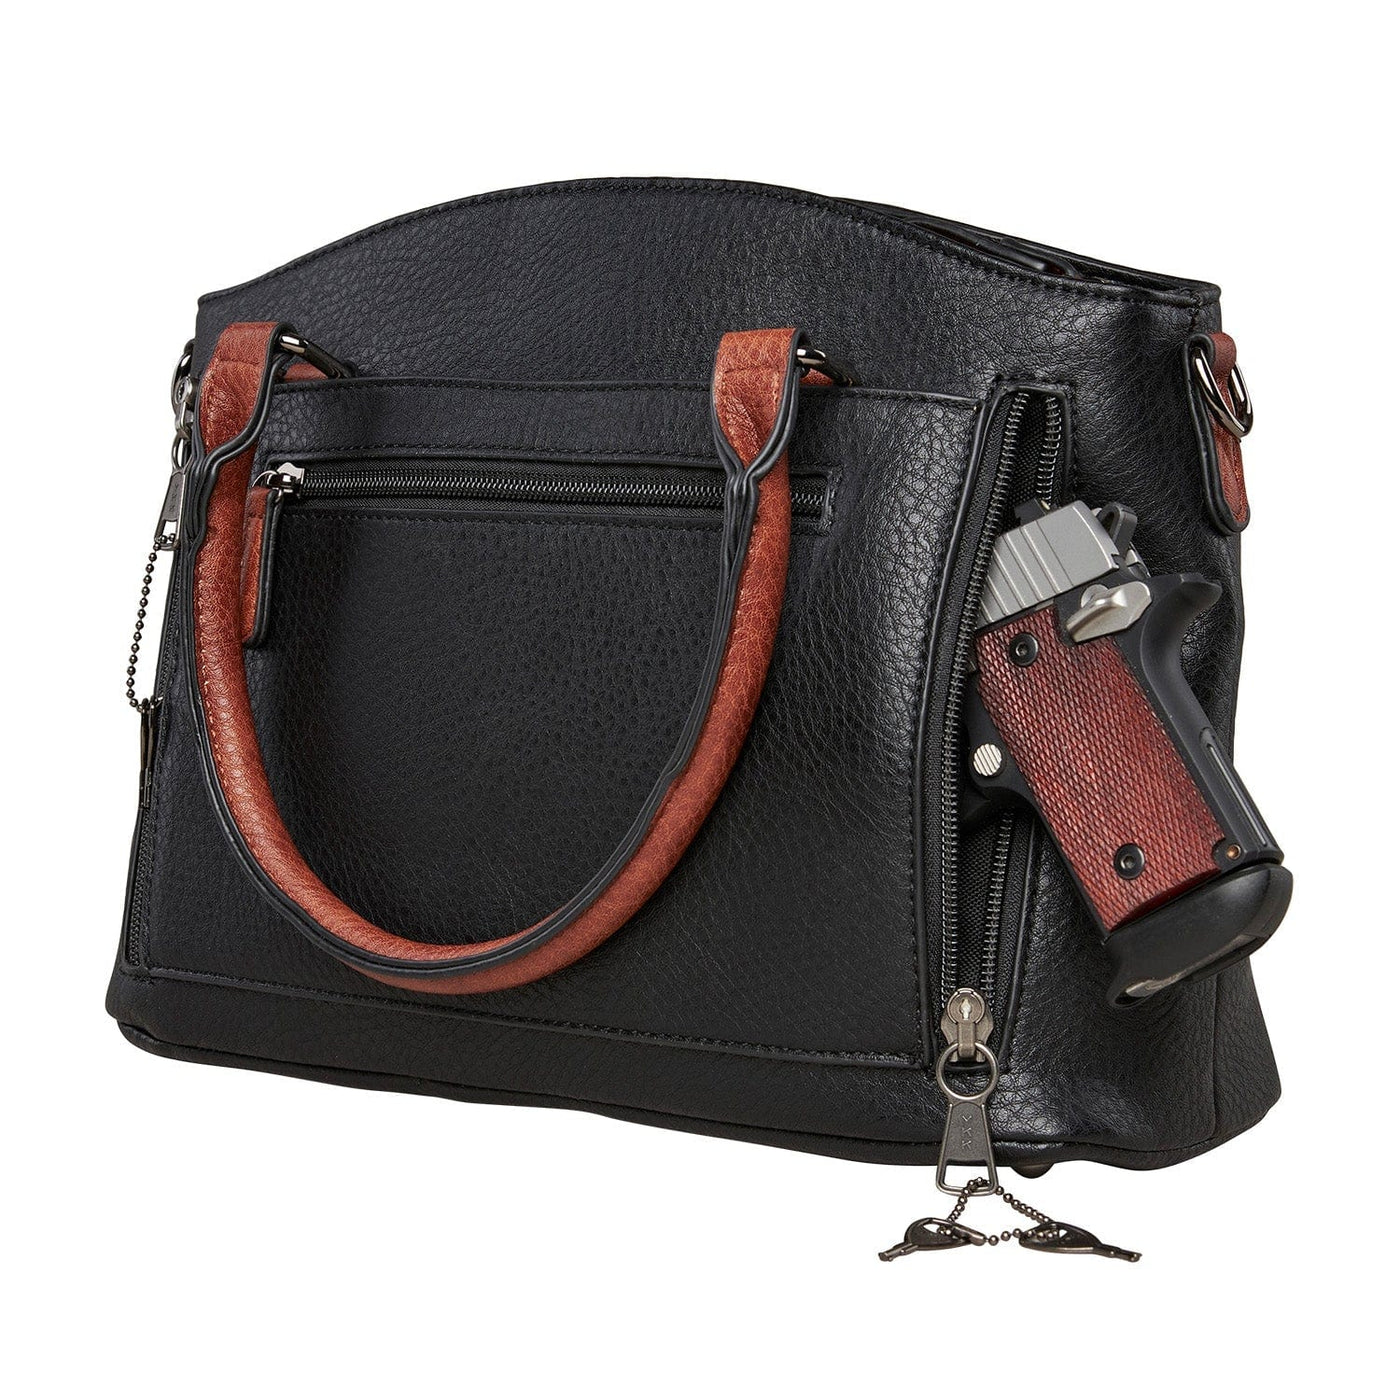 Concealed Carry Carly Satchel Bag by Lady Conceal - YKK Locking Zippers - Universal Holster - Womens Conceal and Carry Purse for Pistol - designer concealed carry purse - Glock 19 purse 